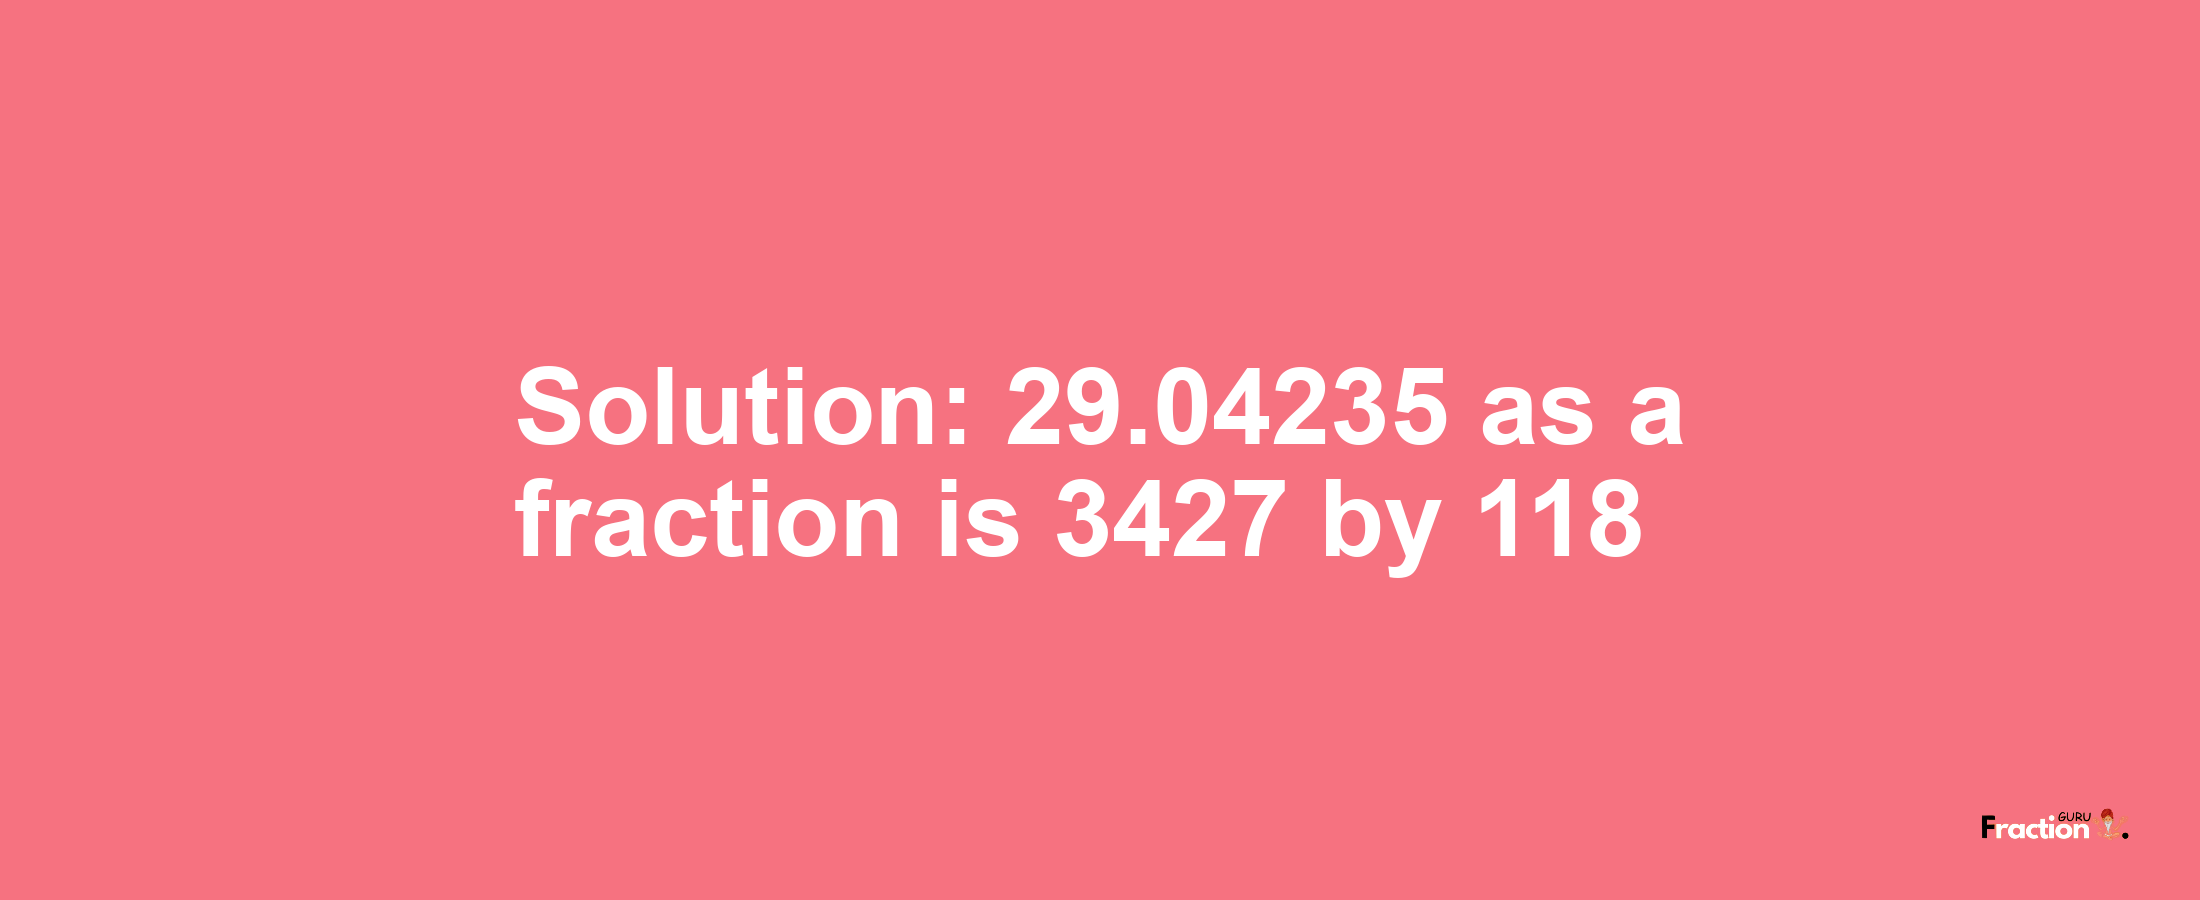 Solution:29.04235 as a fraction is 3427/118